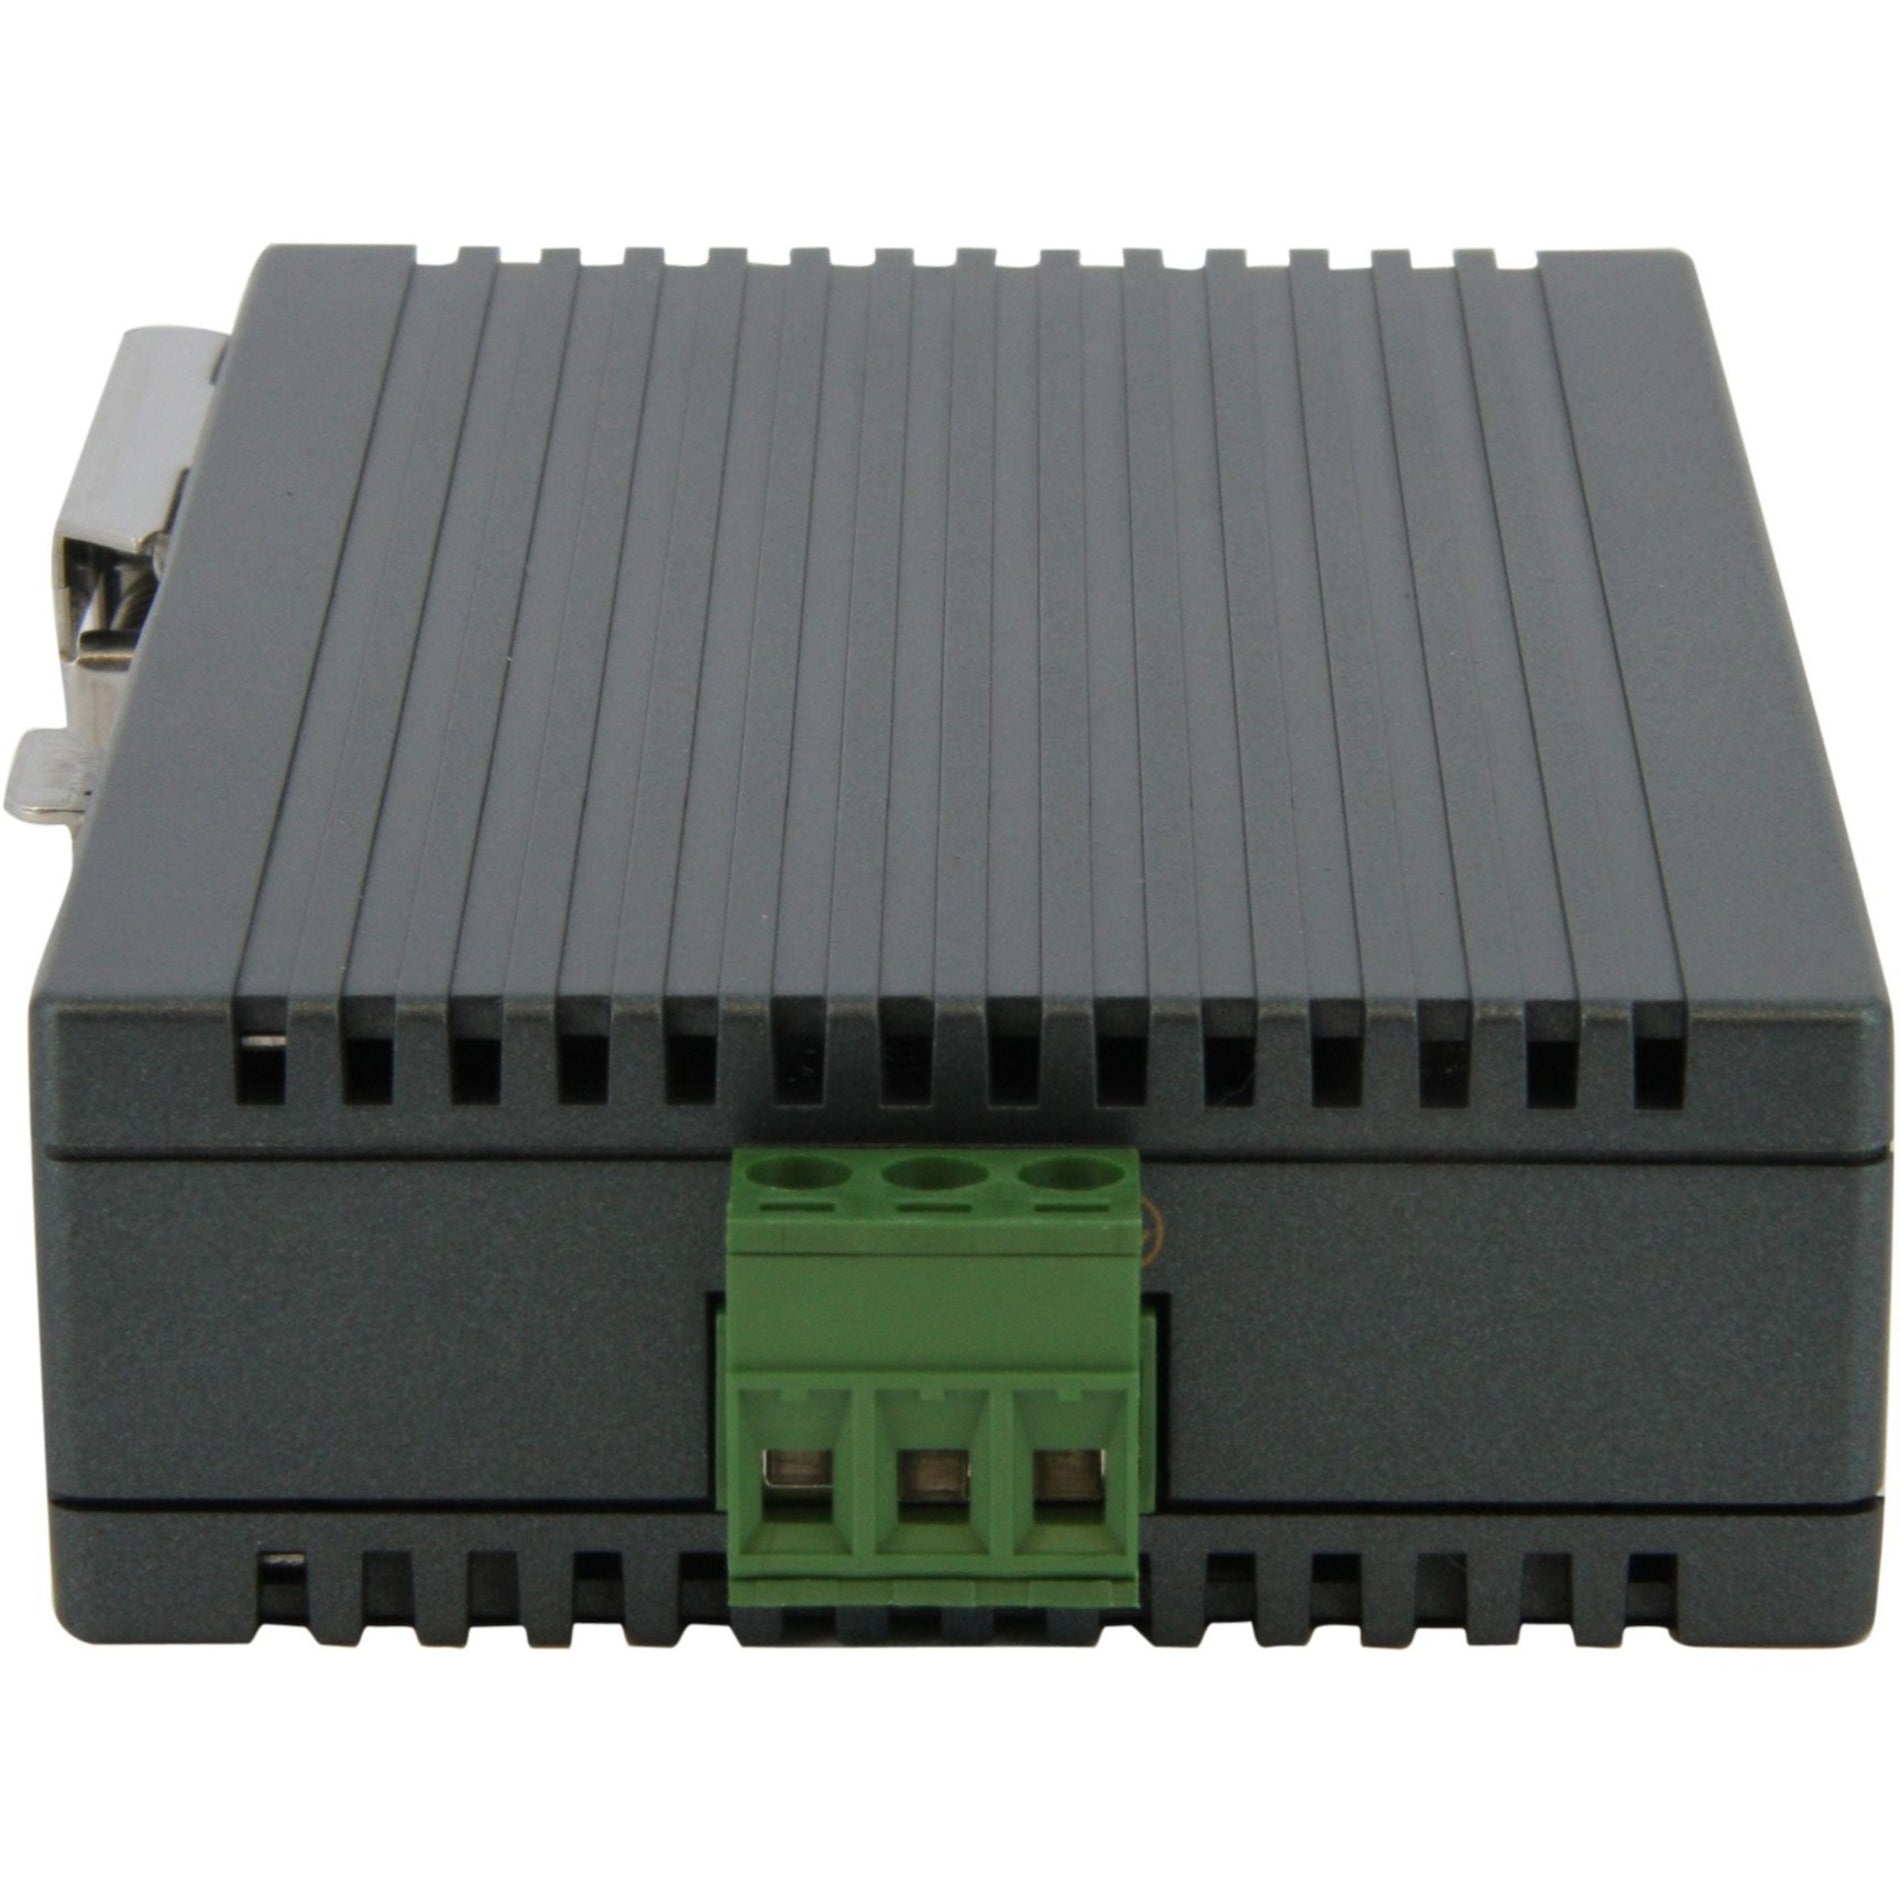 StarTech.com IES5102 5-Port Industrial Ethernet Switch - DIN Rail Mountable, Reliable and TAA Compliant